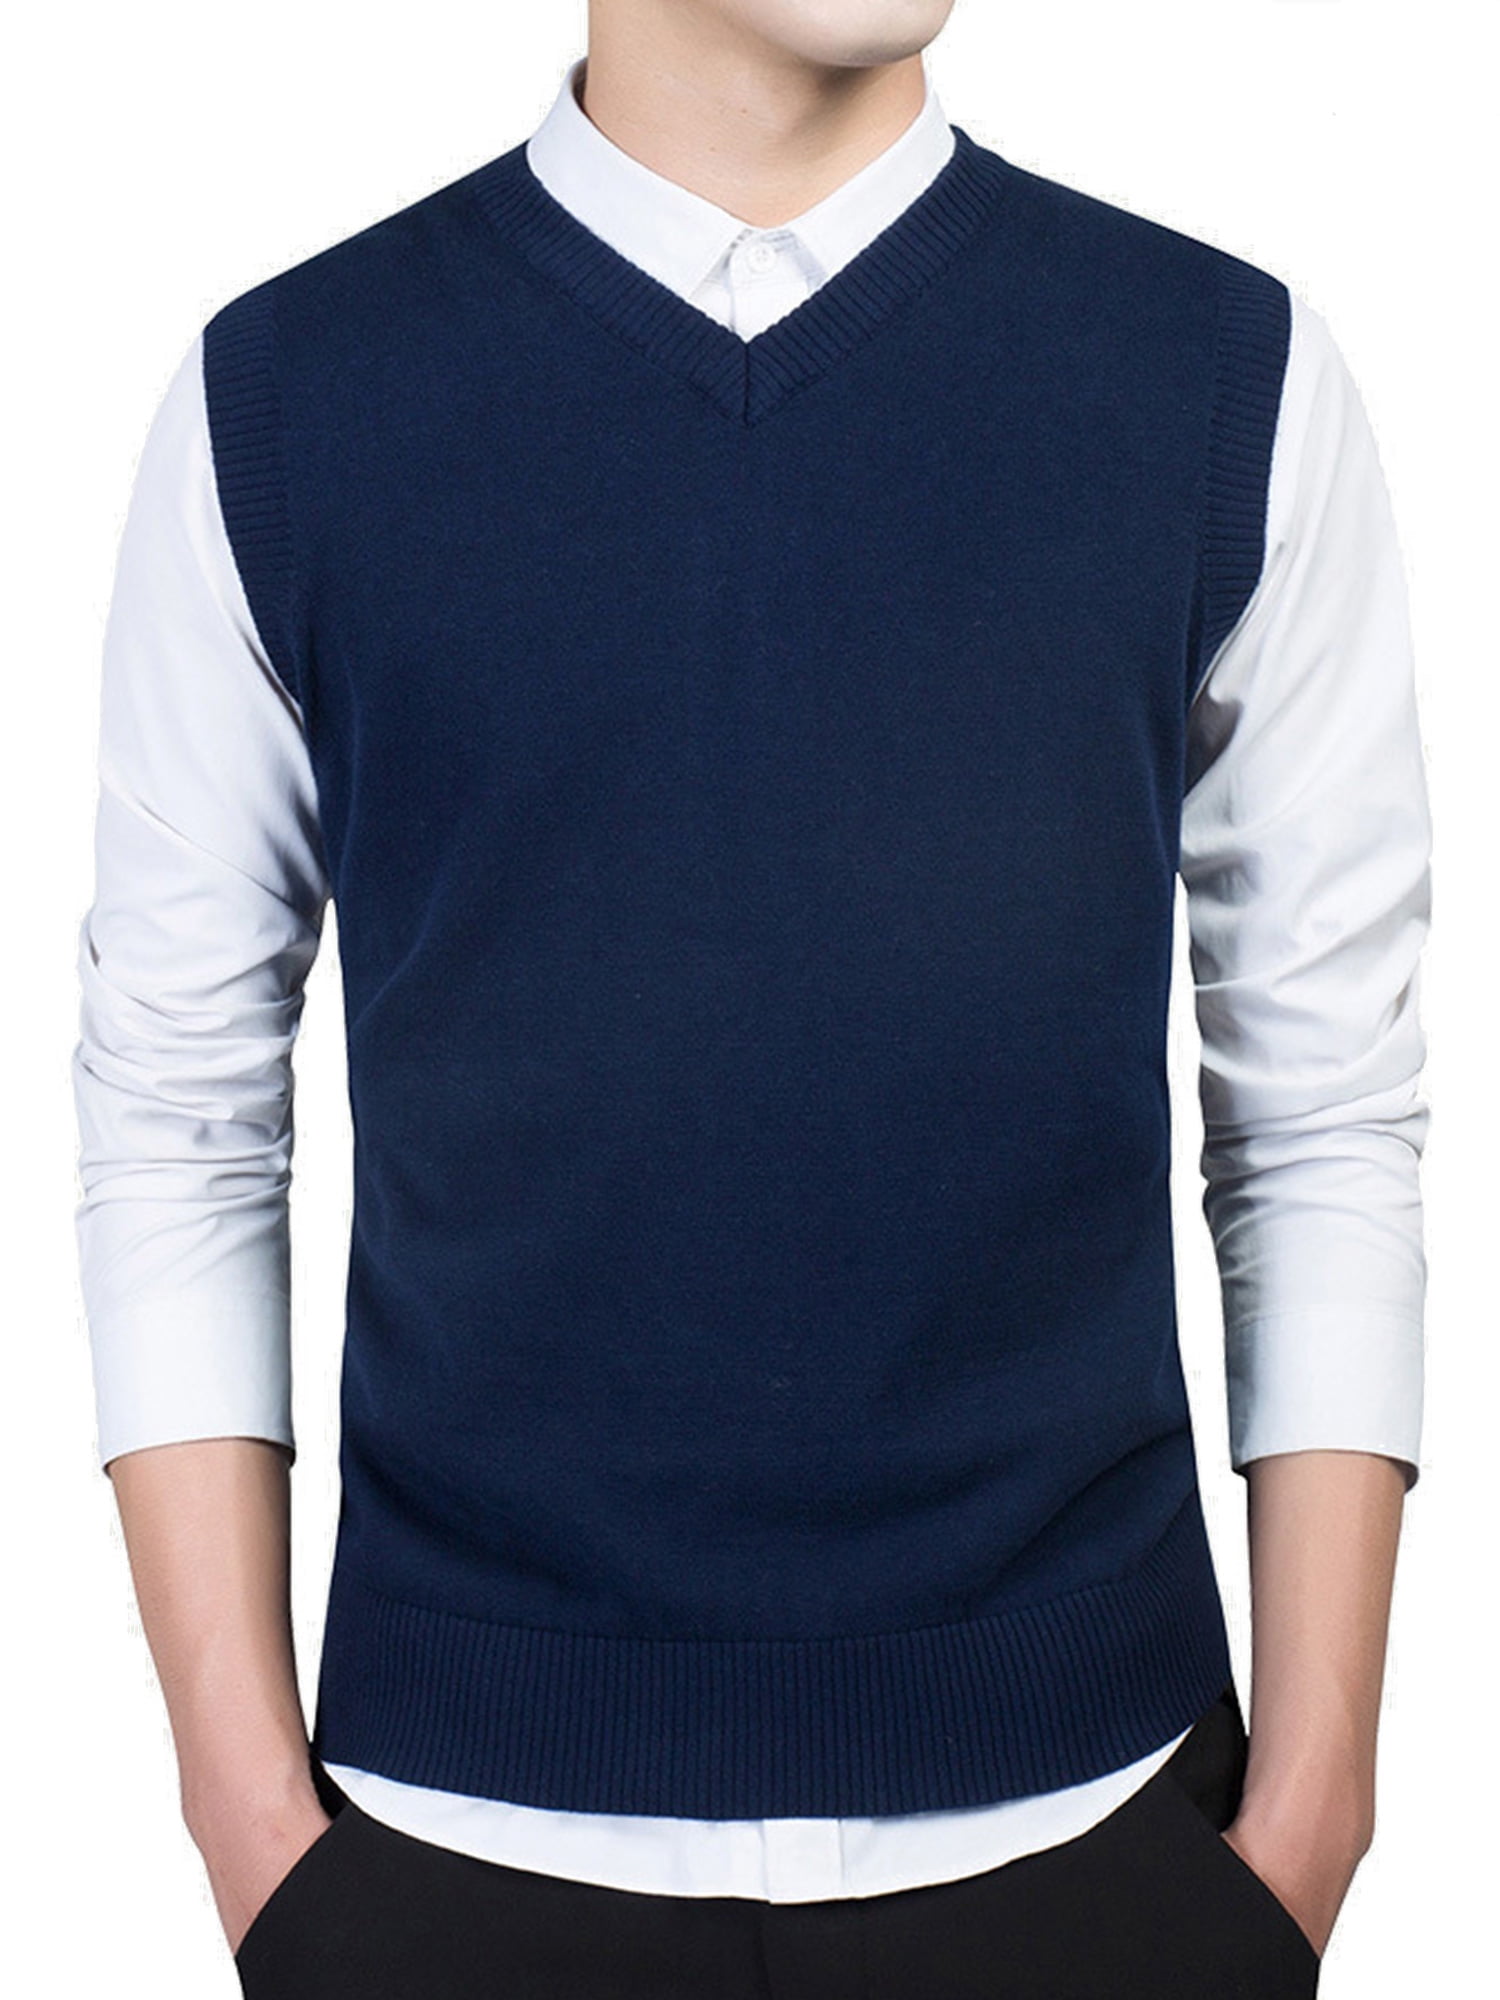 COOFANDY Mens Casual Sweater Vest Lightweight V-Neck Sleeveless Sweaters with Ribbing Edge